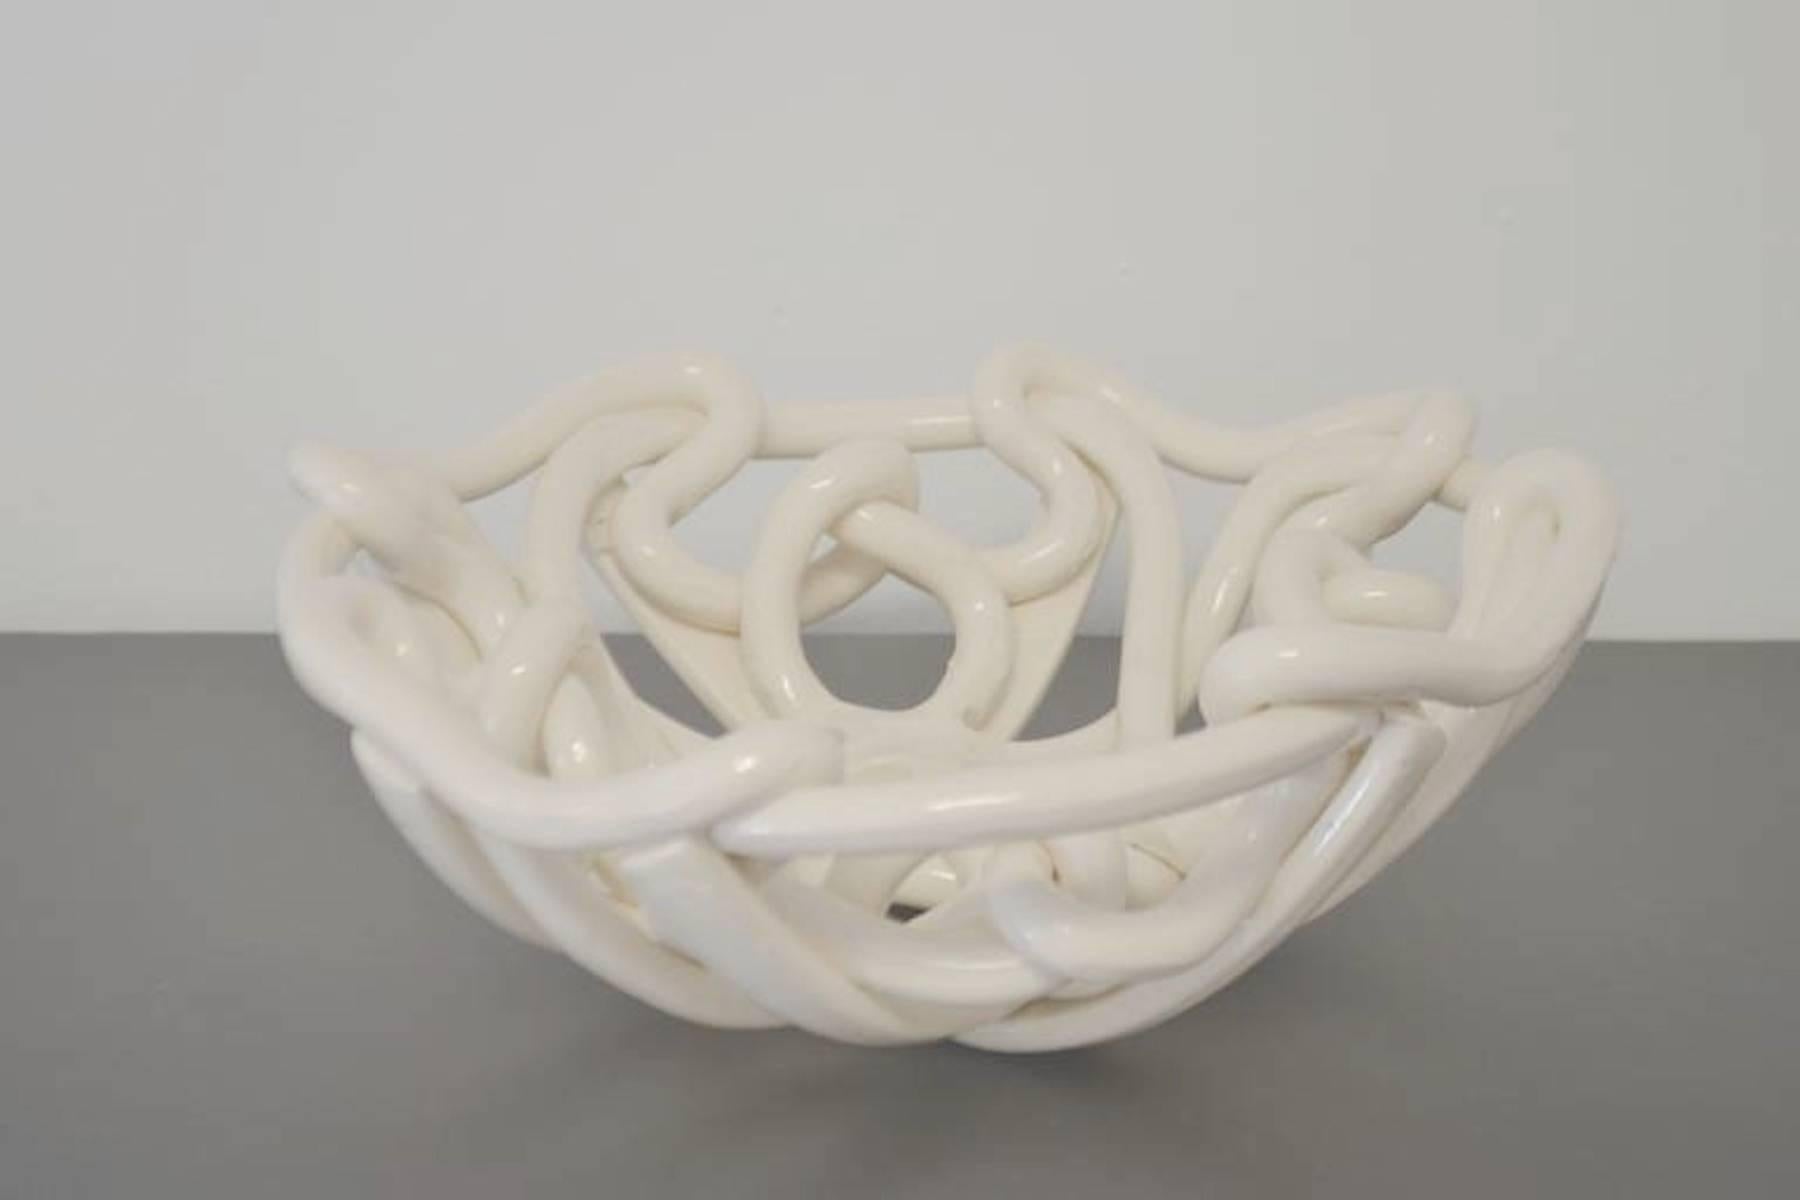 Stunning midcentury white glazed ceramic free-form bowl, circa 1960s. This organic hand thrown bowl is composed of woven interlacing strands.